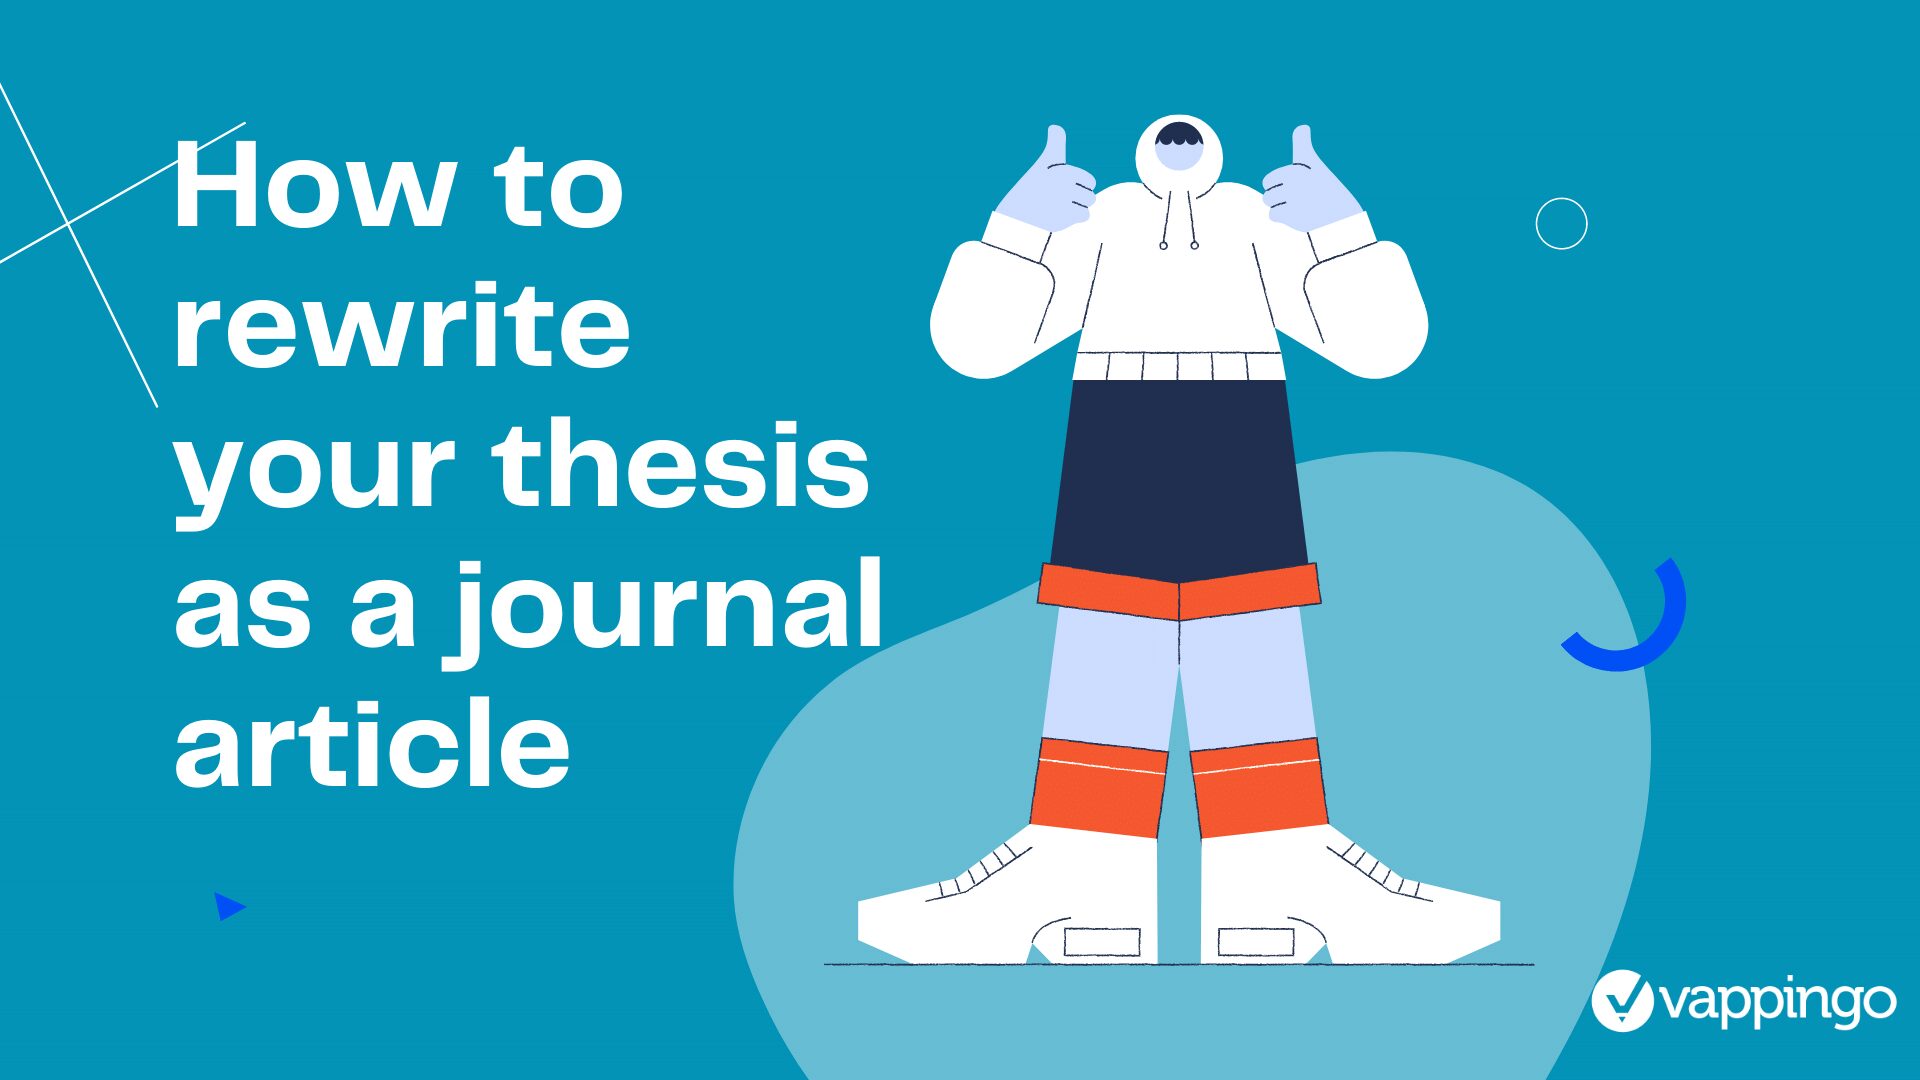 How to rewrite your thesis as a dissertation